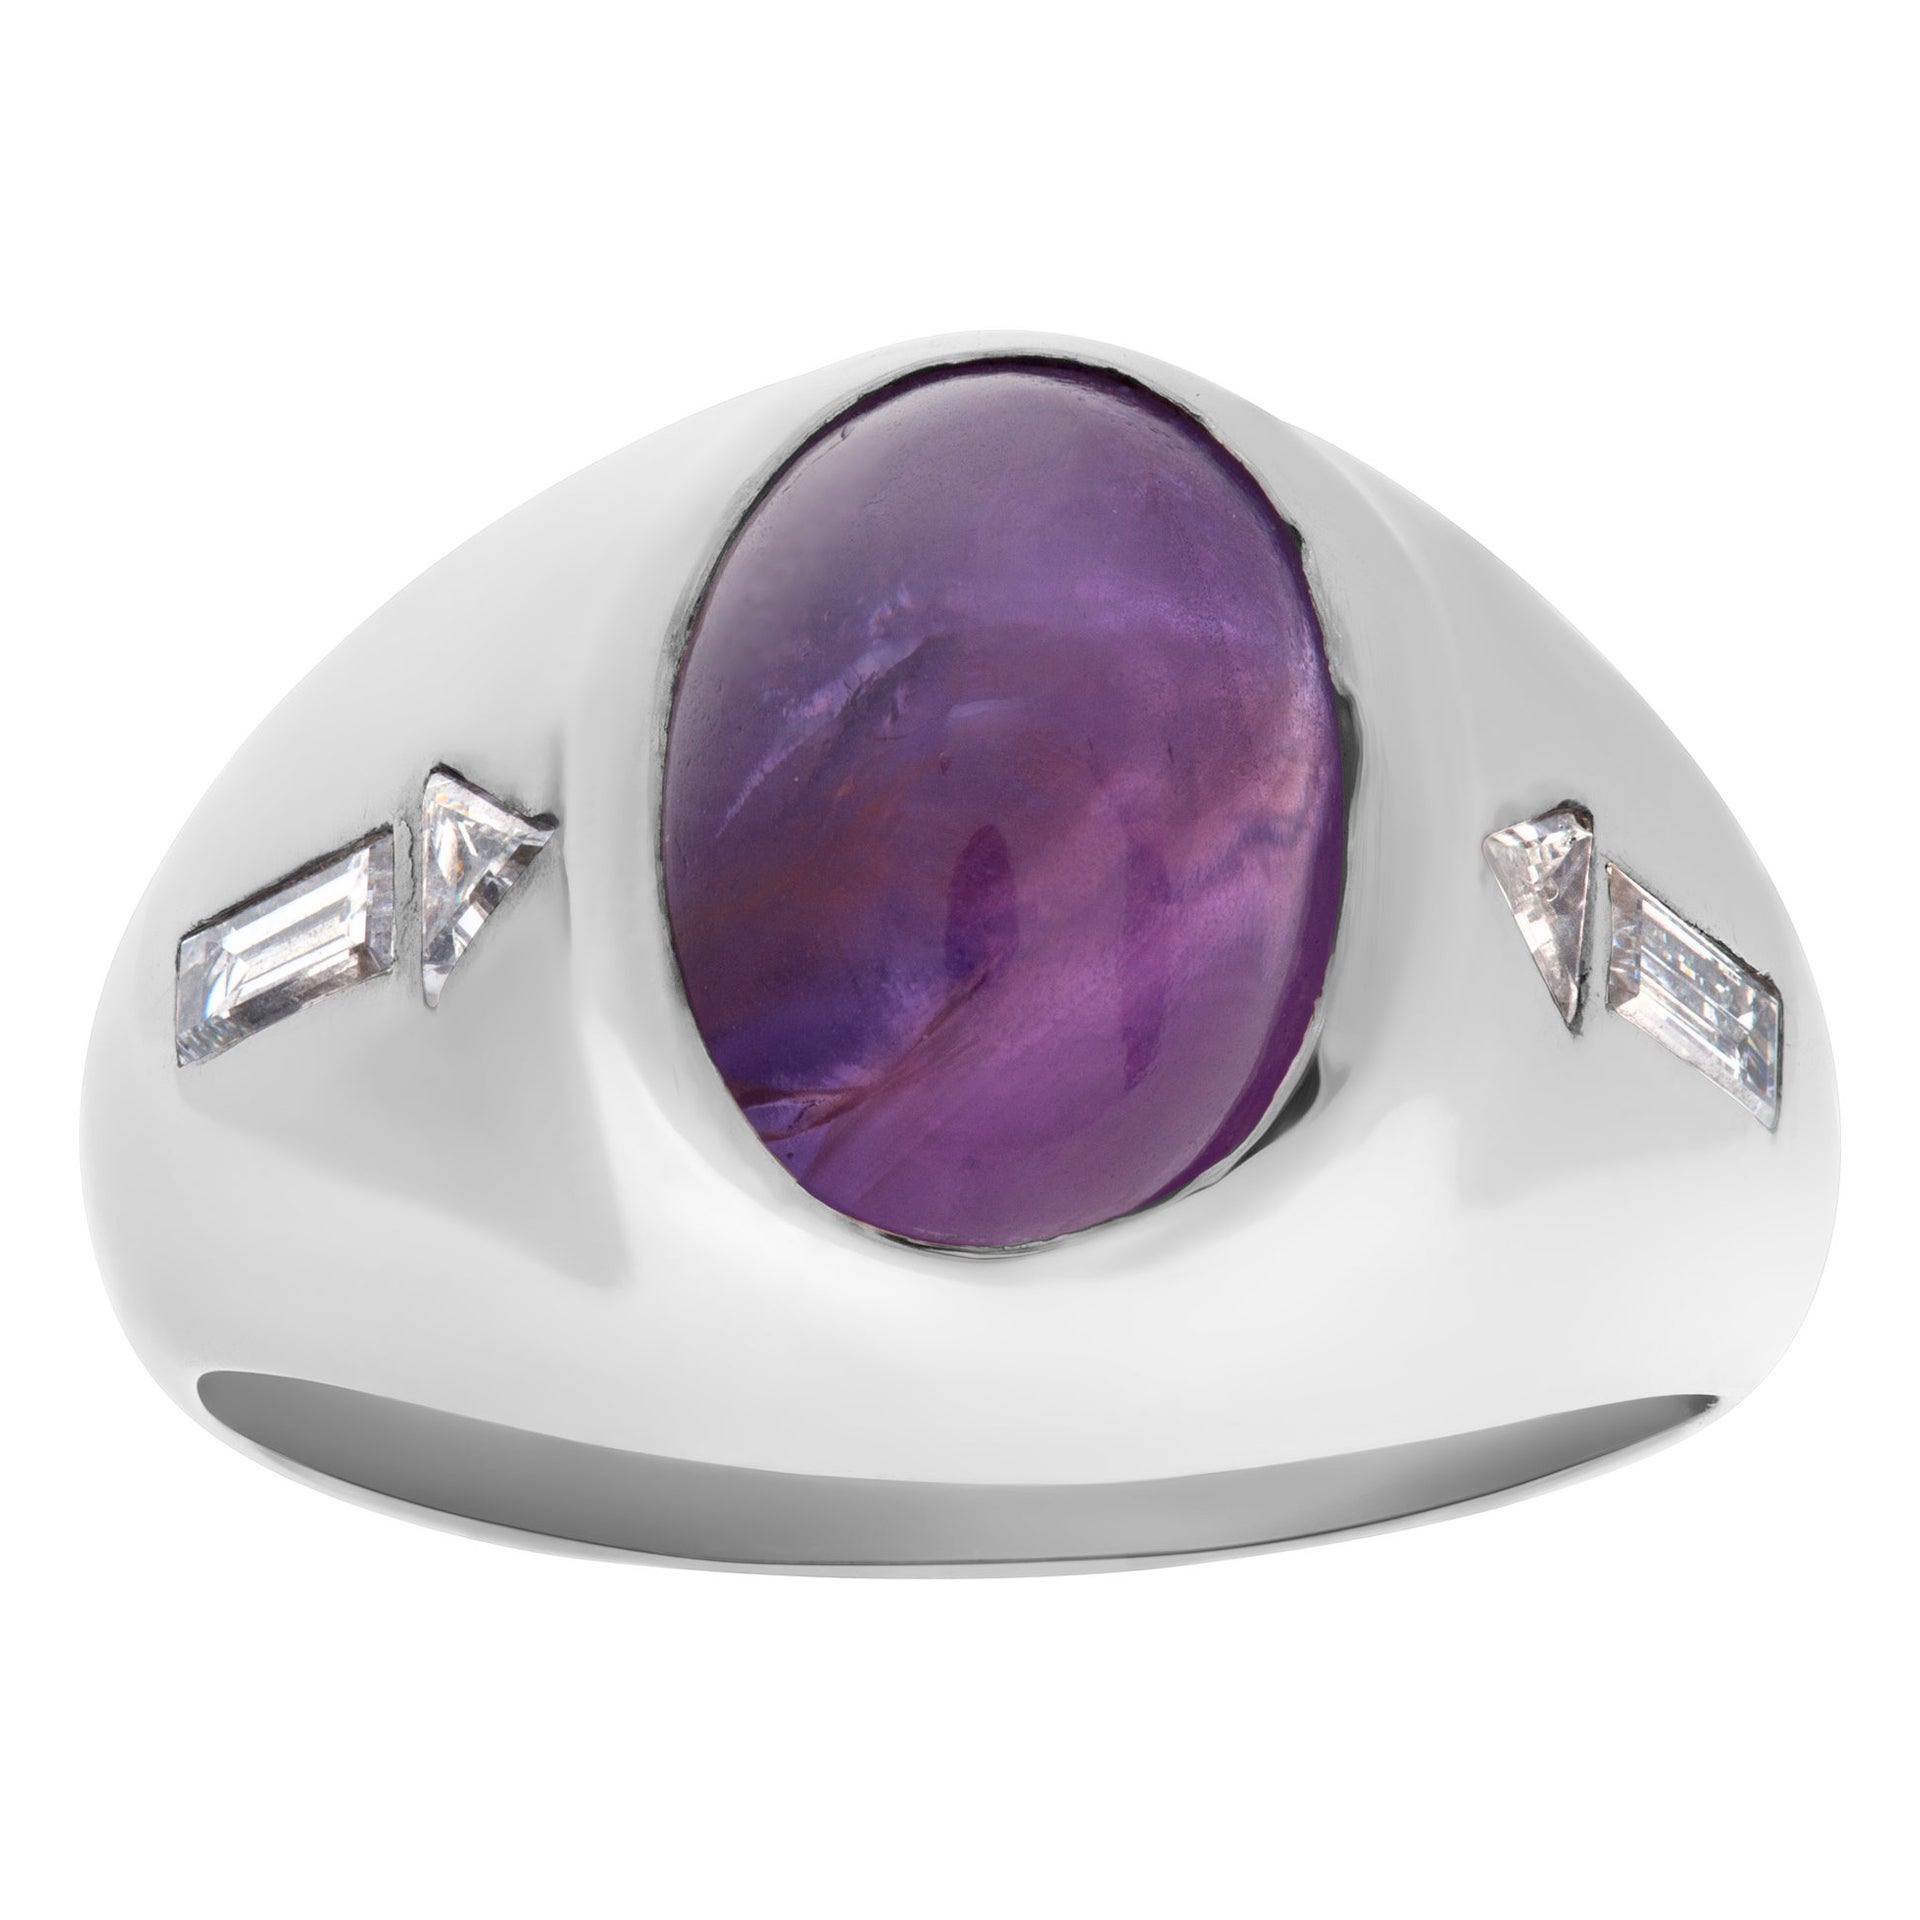 Star Sapphire Ring with Diamond Accents in 14k White Gold. 2.00 Cts Sapphire